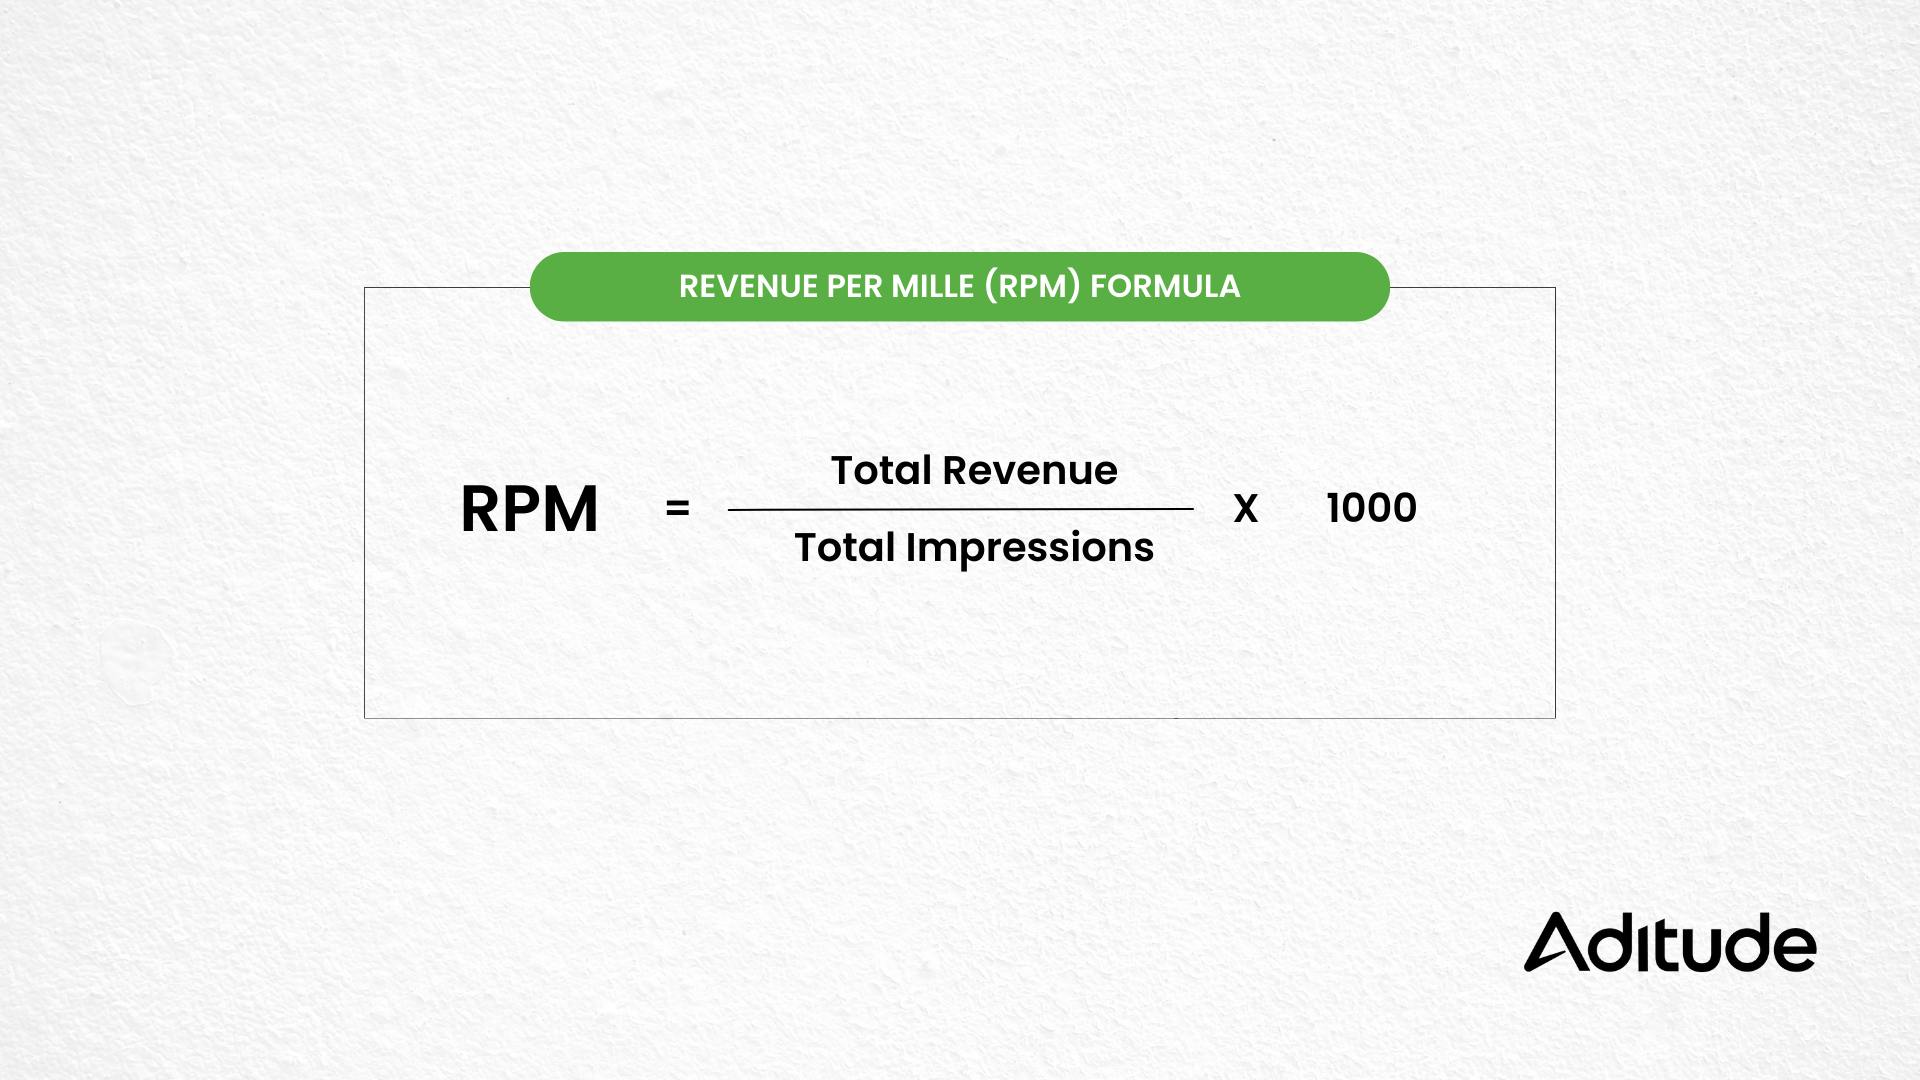 RPM equals Total Revenue divided by Total Impression multiplied by 1000